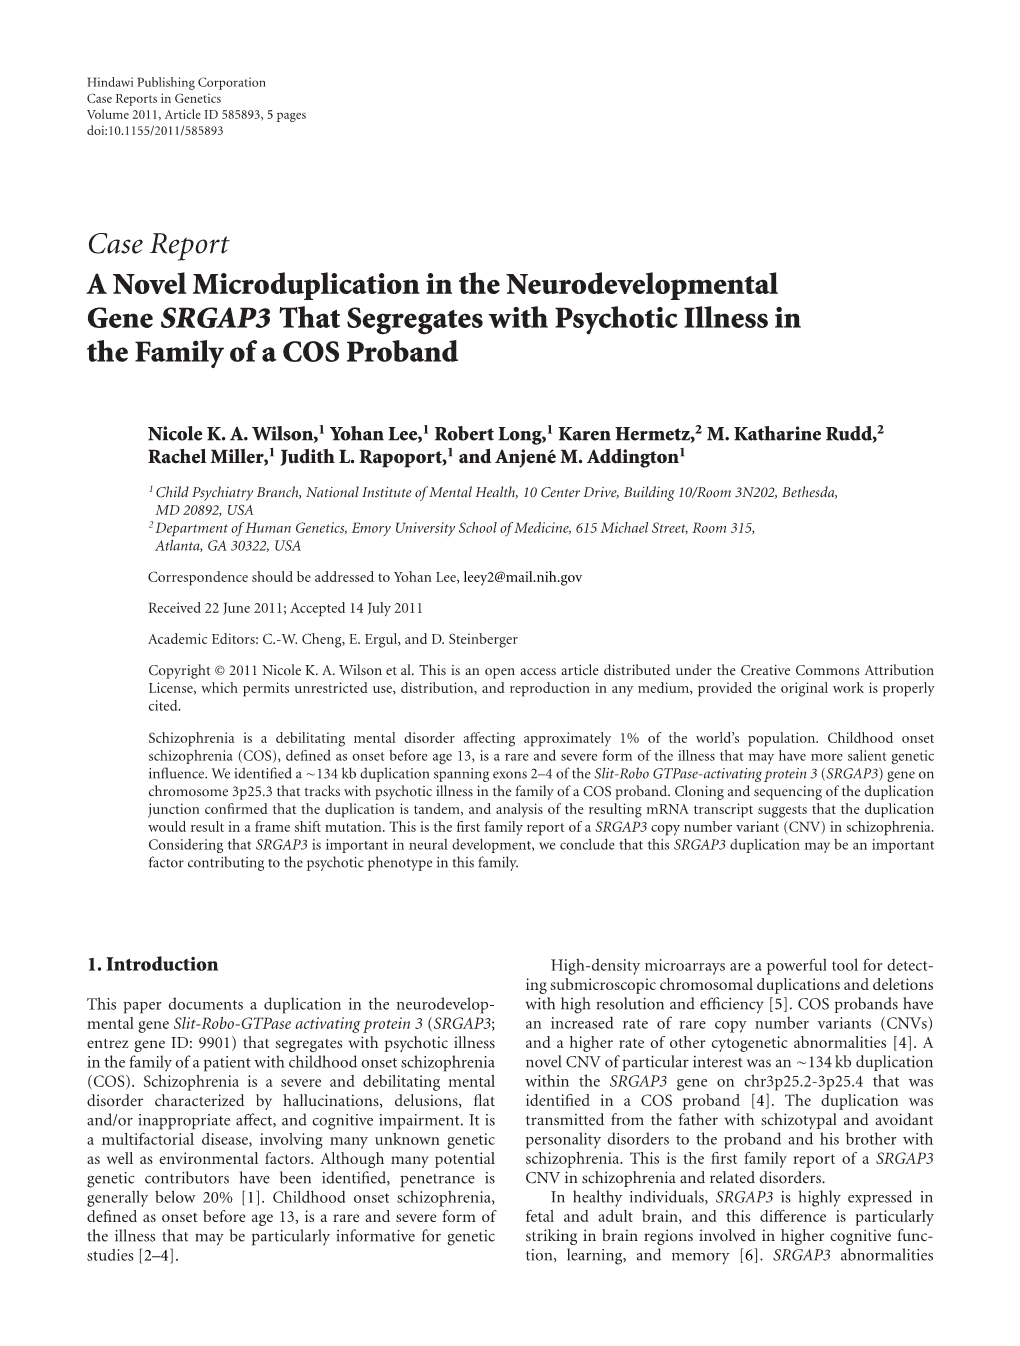 A Novel Microduplication in the Neurodevelopmental Gene SRGAP3 That Segregates with Psychotic Illness in the Family of a COS Proband